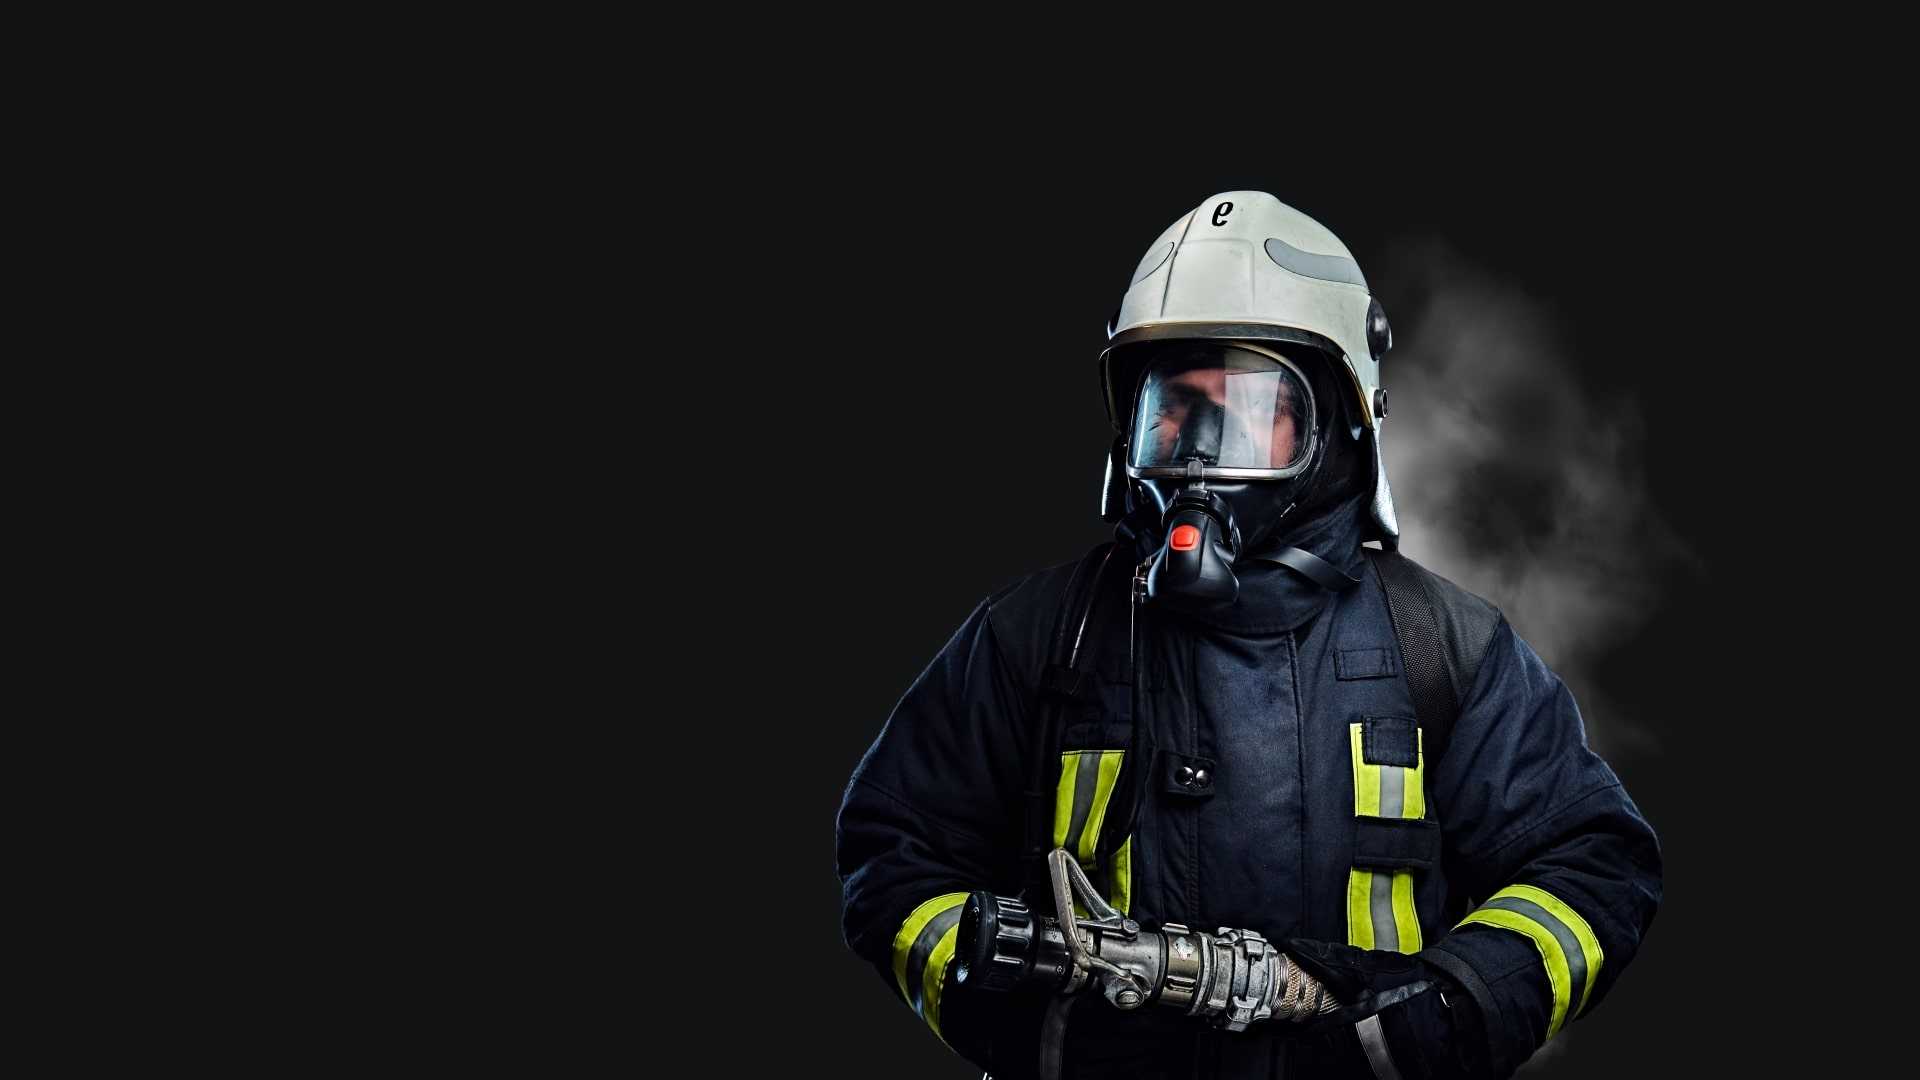 Decontamined gear of the firefighter